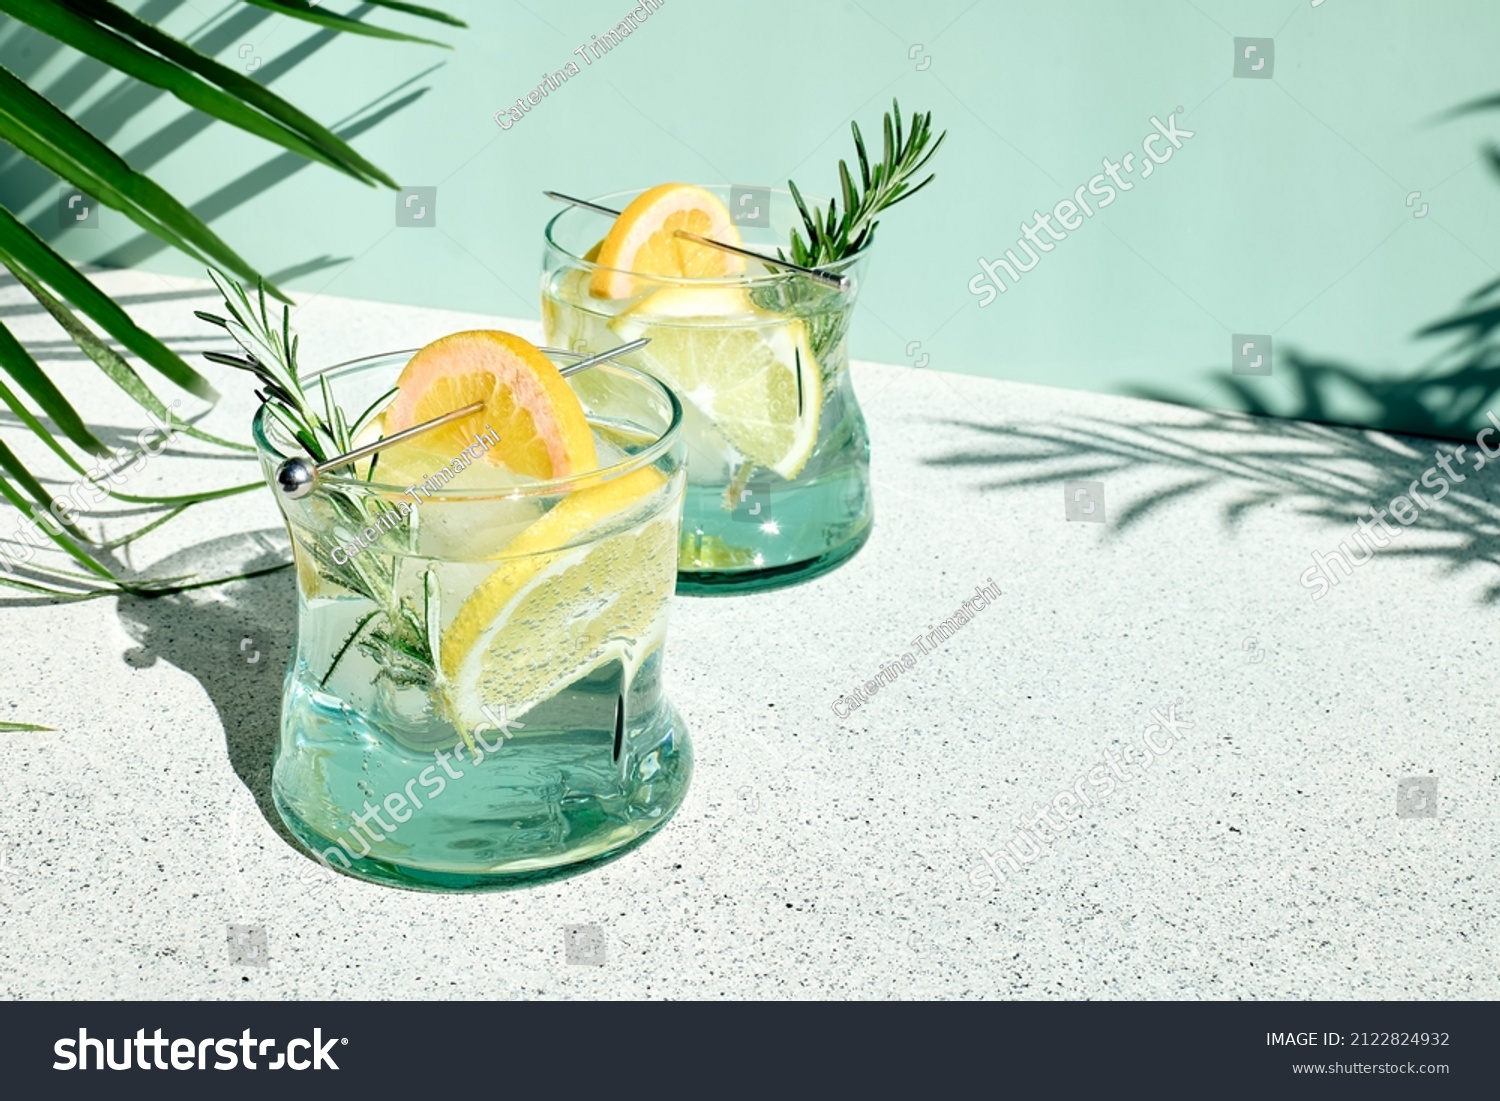 Summer refreshing lemonade drink or alcoholic cocktail with ice, rosemary and lemon slices on pastel light green surface. Fresh healthy cold lemon beverage. Water with lemon. #2122824932